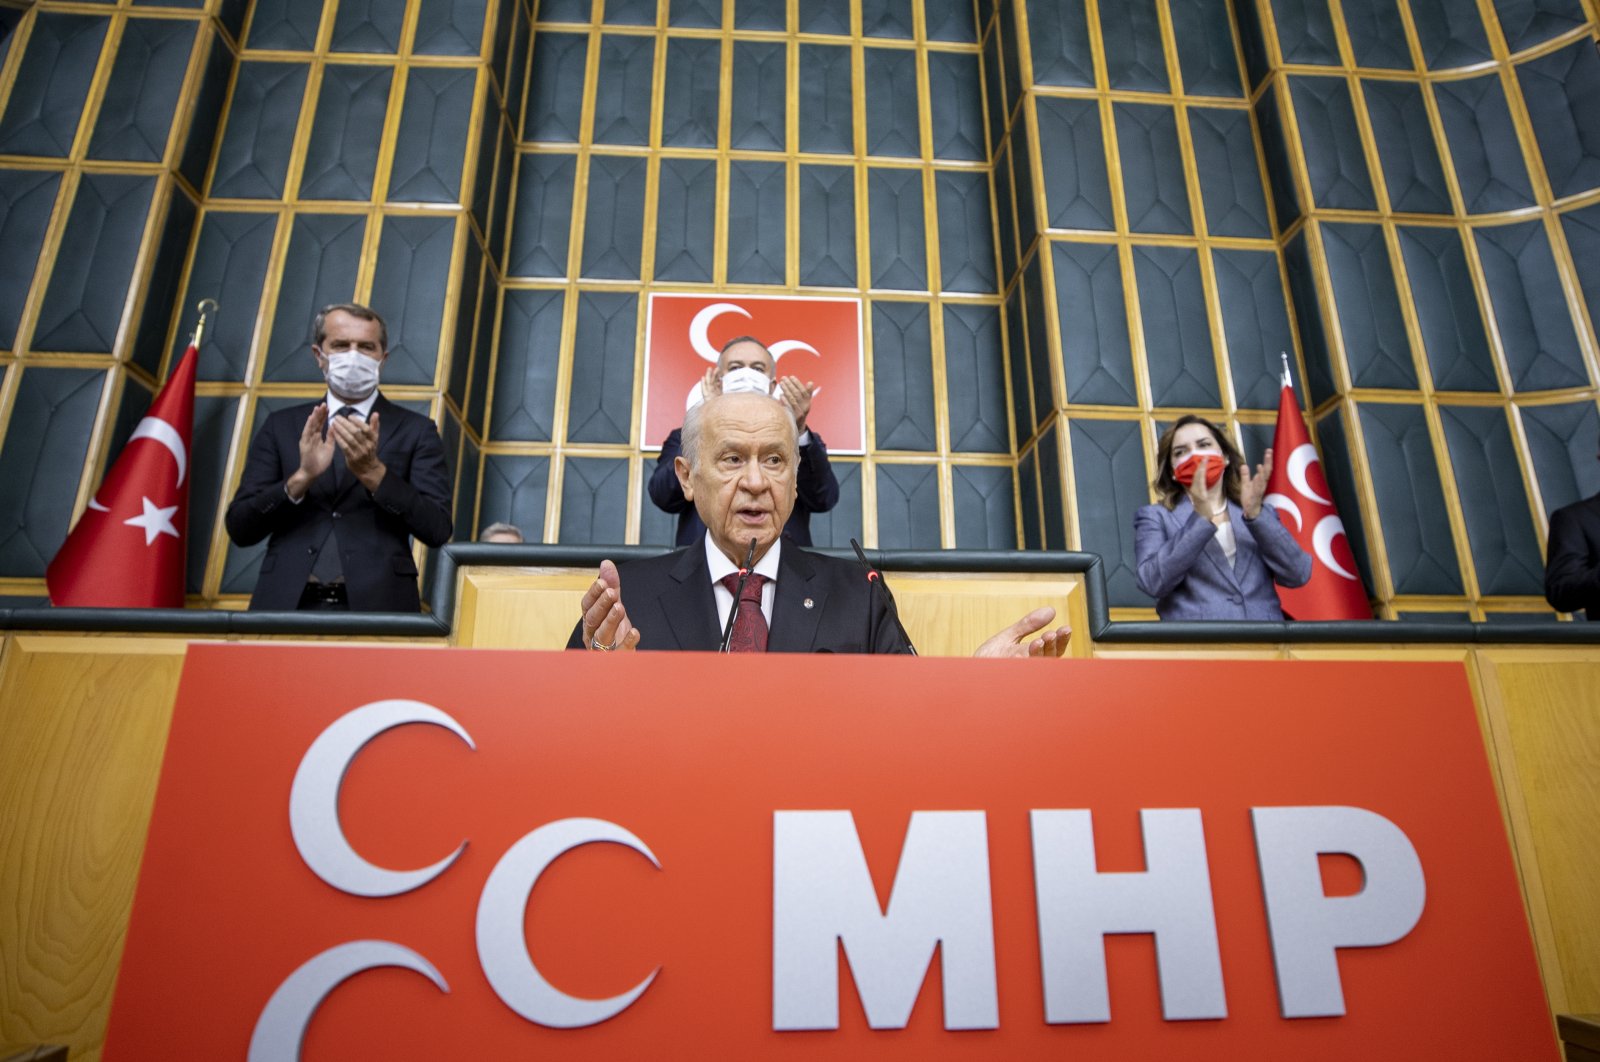 MHP Chairperson Devlet Bahçeli speaks at his party's parliamentary group meeting at the Turkish Parliament in Ankara, Turkey, June 29, 2021. (AA Photo)